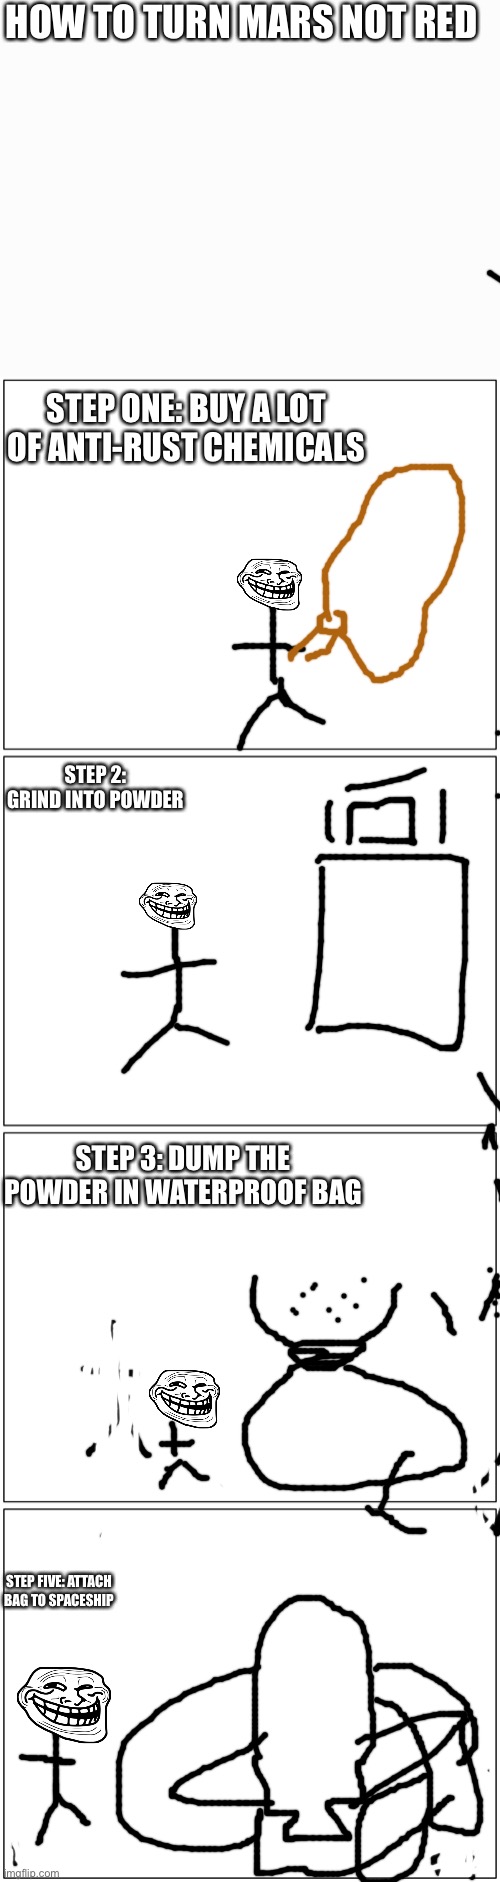 Step six:blast off and spread powder around mars. | HOW TO TURN MARS NOT RED; STEP ONE: BUY A LOT OF ANTI-RUST CHEMICALS; STEP 2: GRIND INTO POWDER; STEP 3: DUMP THE POWDER IN WATERPROOF BAG; STEP FIVE: ATTACH BAG TO SPACESHIP | image tagged in memes,blank comic panel 1x2 | made w/ Imgflip meme maker